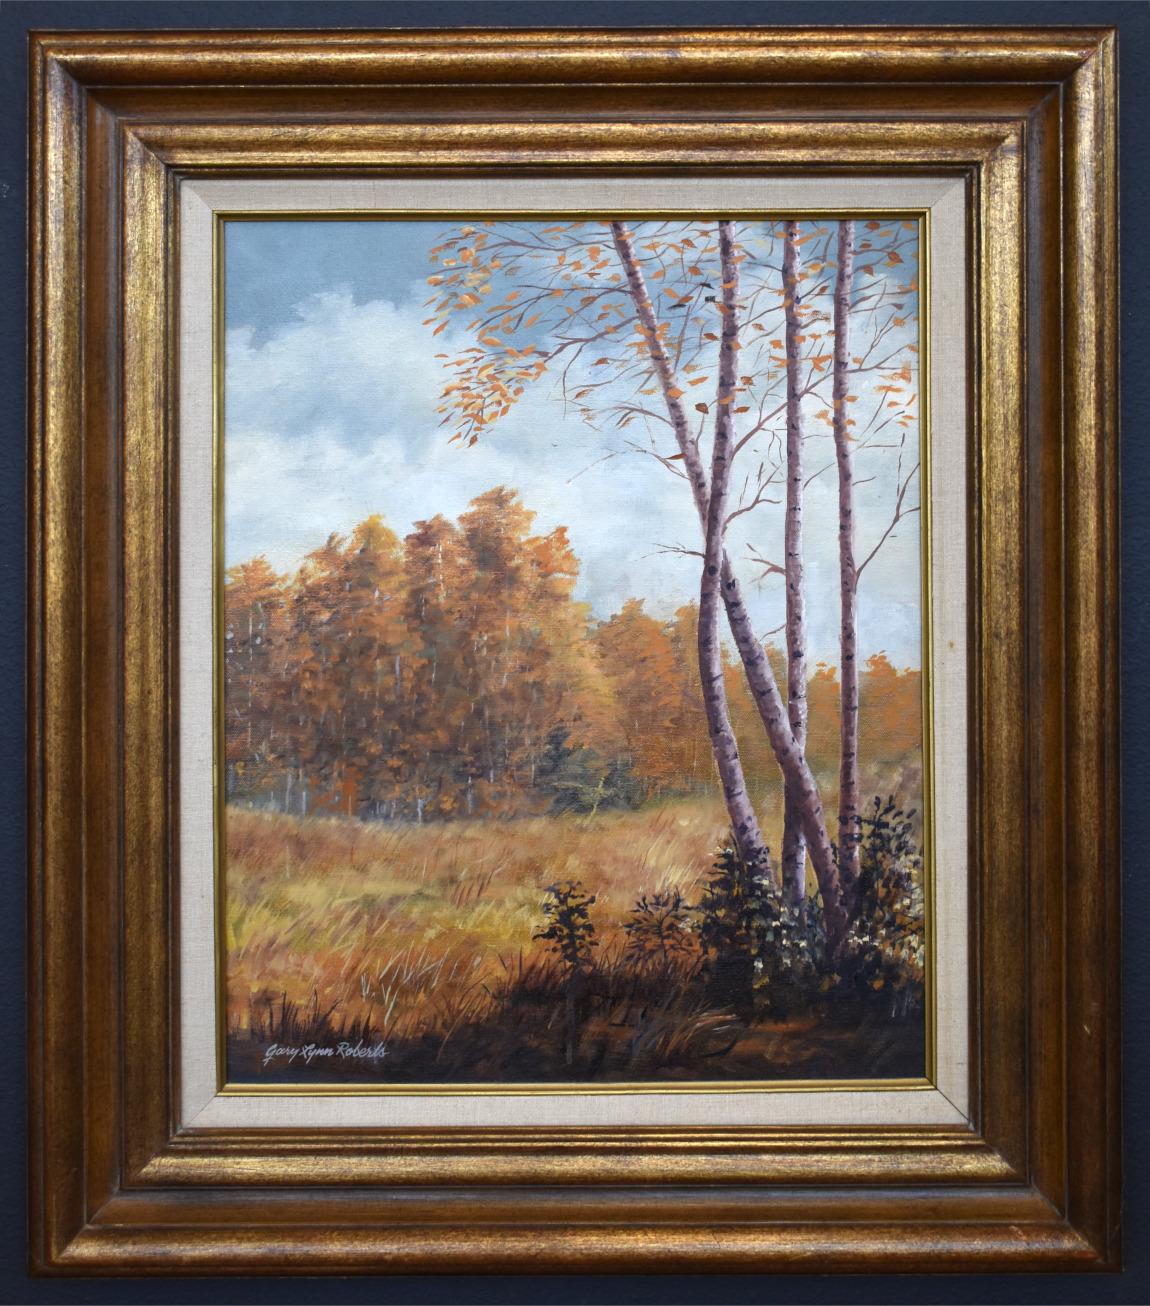 Gary Lynn Roberts Landscape Painting - "FALL LANDSCAPE" HILL COUNTRY